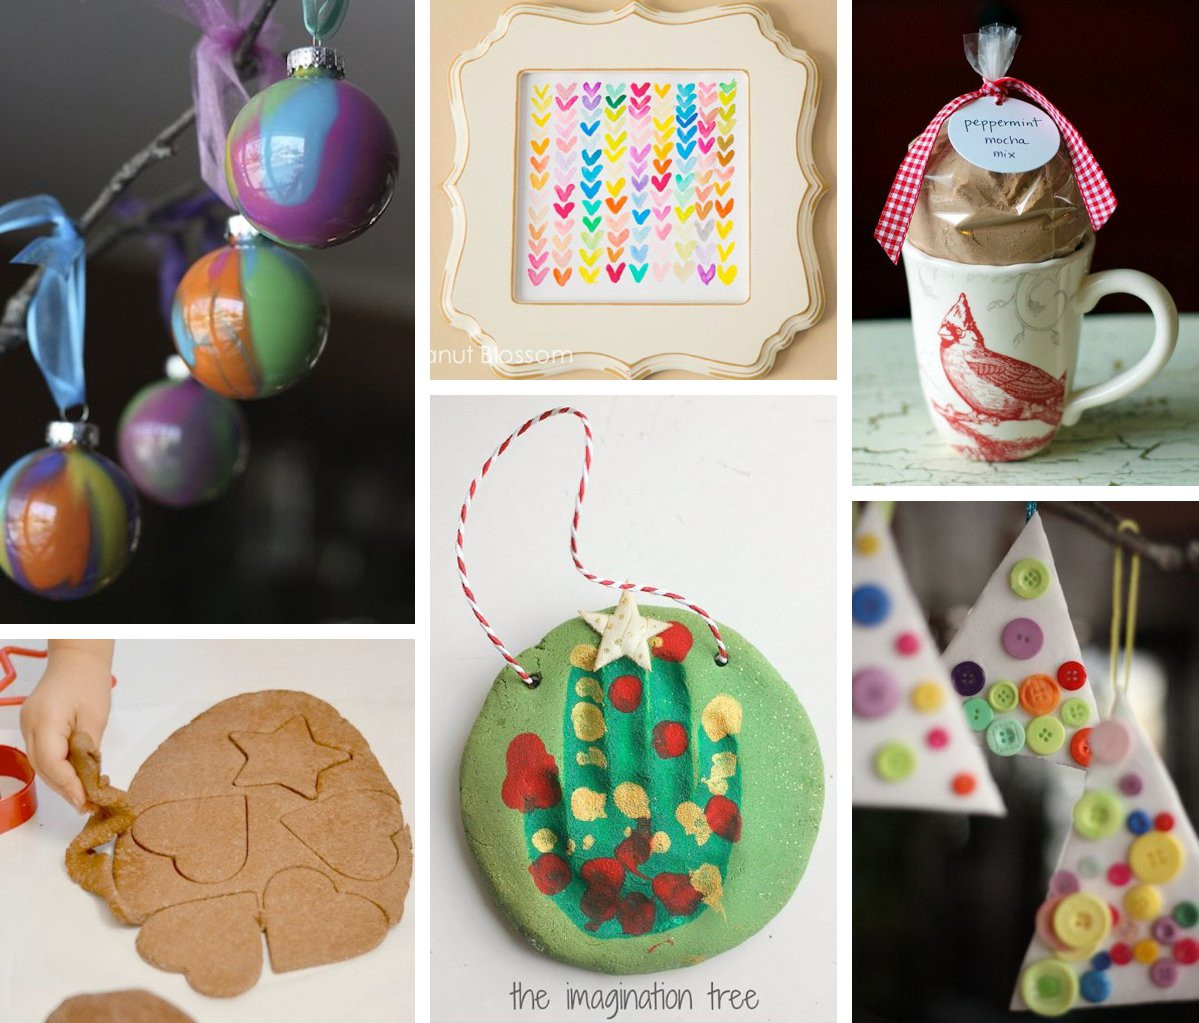 Easy Christmas Gifts For Kids To Make
 Awesome Handmade Presents 10 DIY Holiday Gifts Kids Can